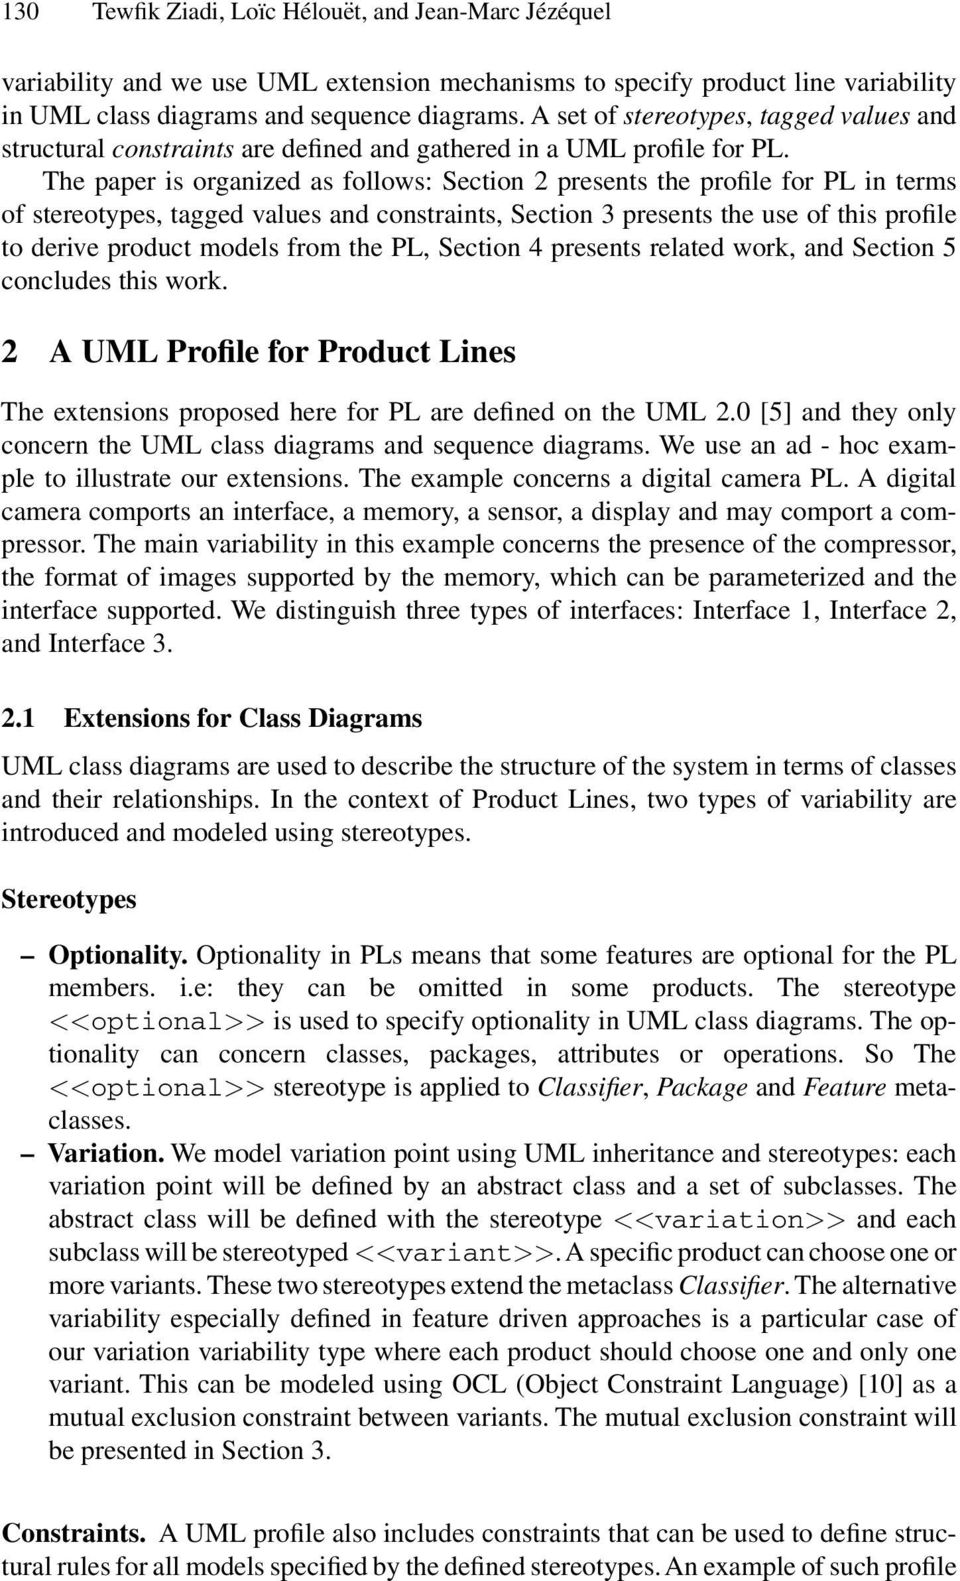 The paper is organized as follows: Section 2 presents the profile for PL in terms of stereotypes, tagged values and constraints, Section 3 presents the use of this profile to derive product models